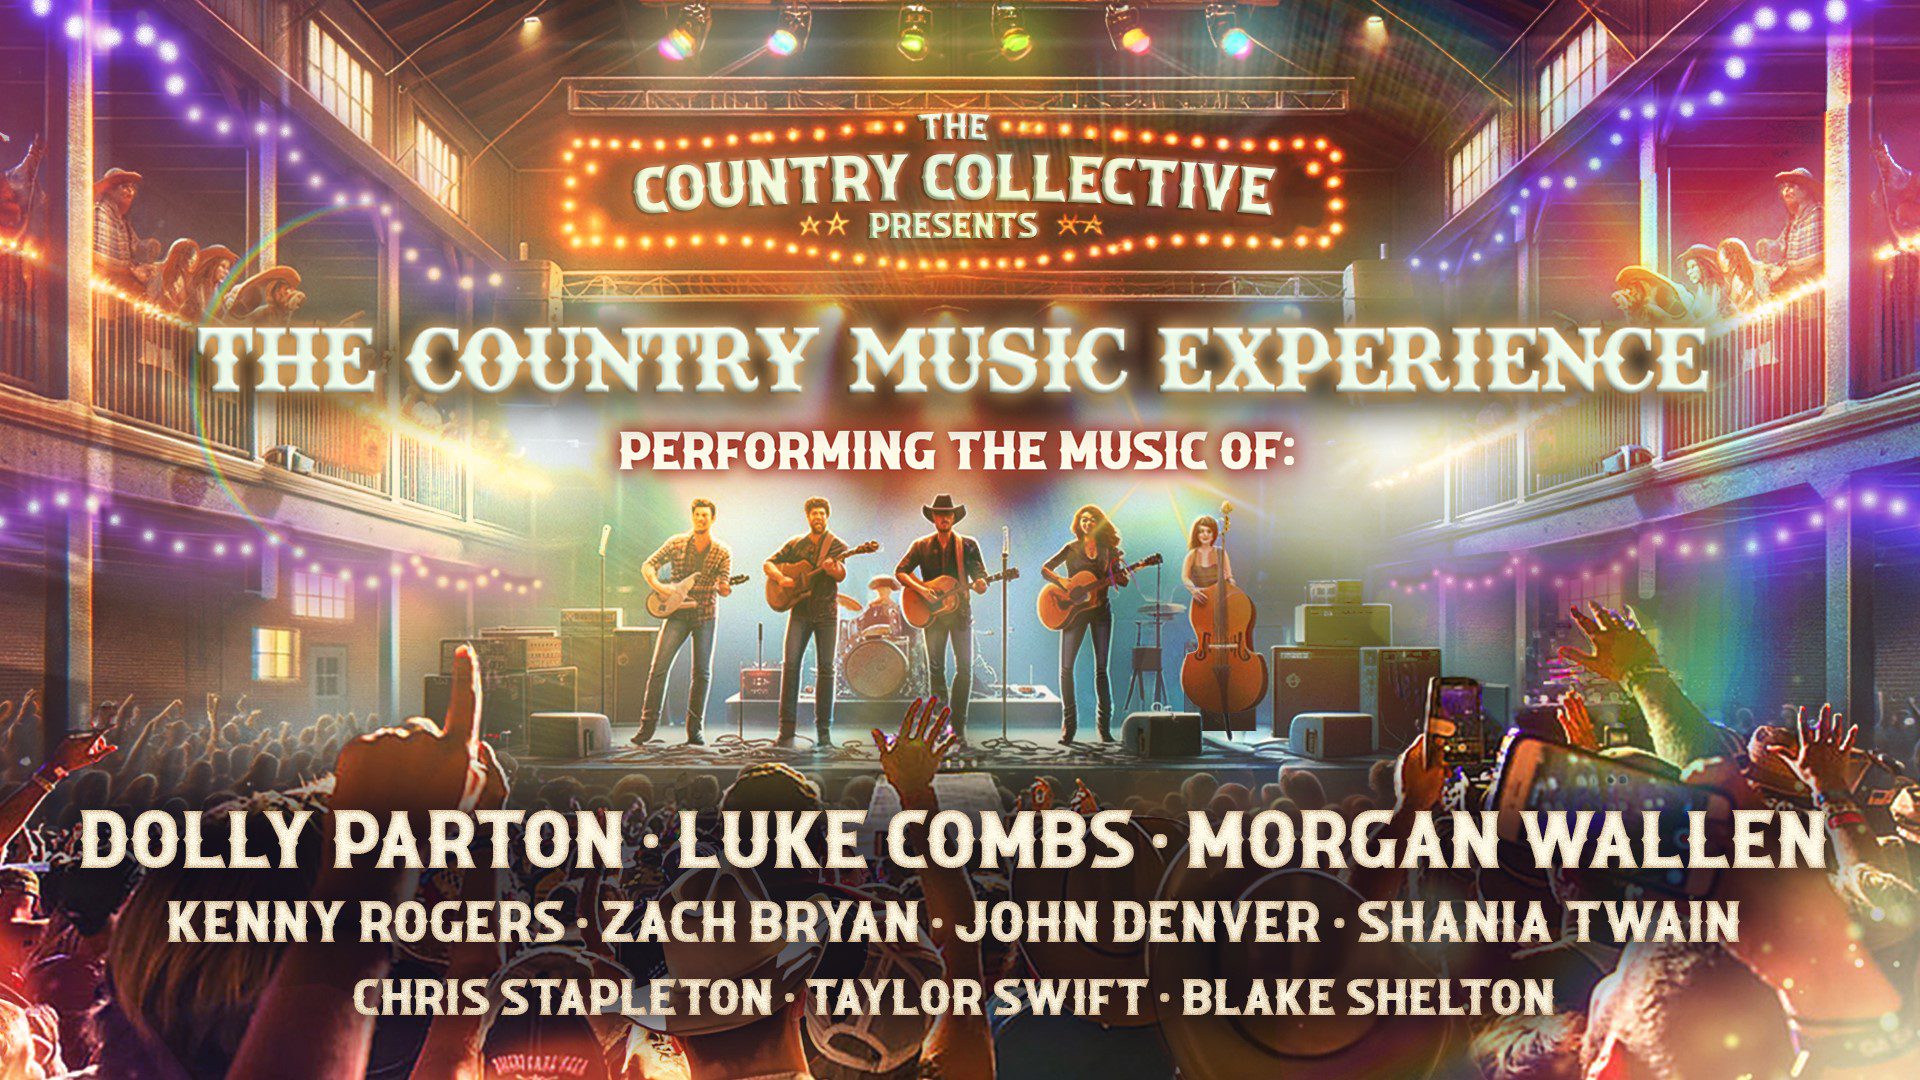 The Country Music Experience by The Country Collective